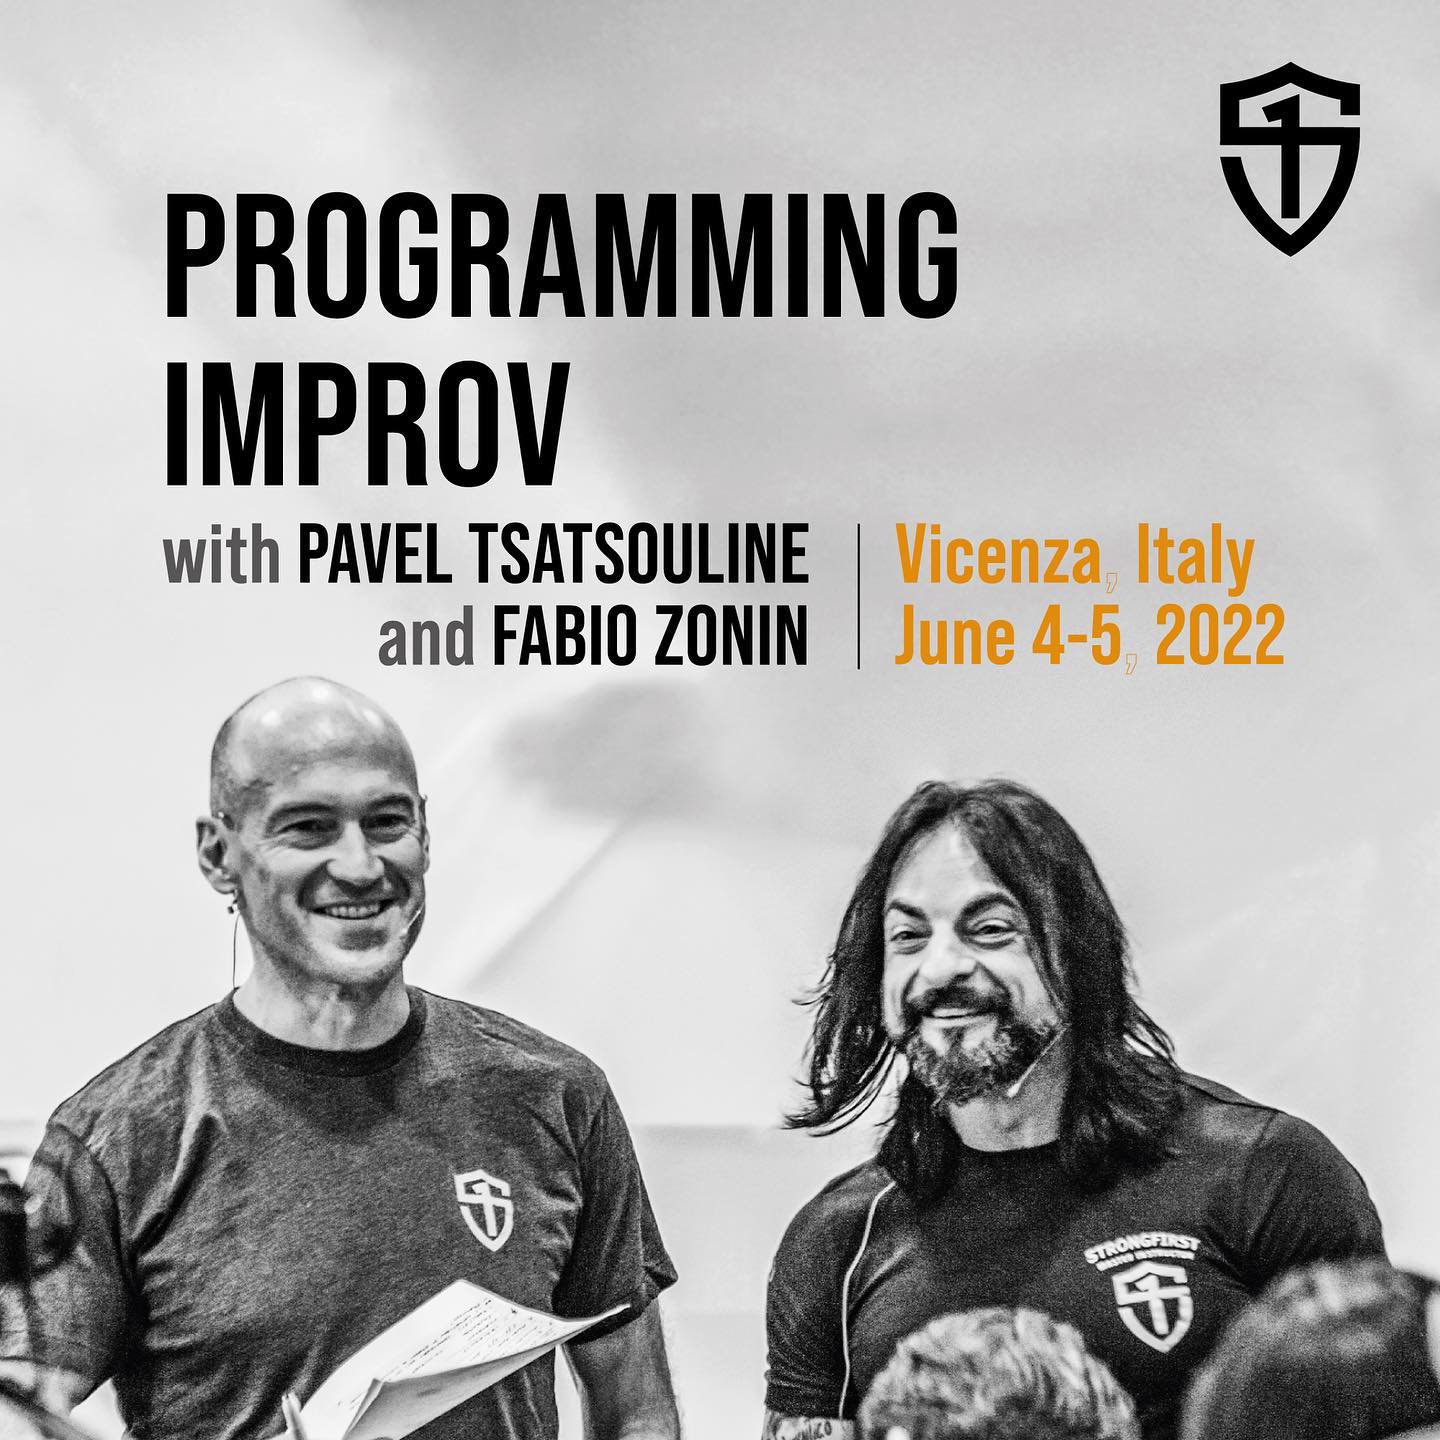 Say no to faddish and amateurish programming. Learn from the pros the scientific principles and practical tactics of strength programming.

Attend  PROGRAMMING IMPROV

CLICK THE LINK IN THE BIO!

#strongfirst #programming #pavel #paveltsatsouline #fabiozonin #bestrongfirst